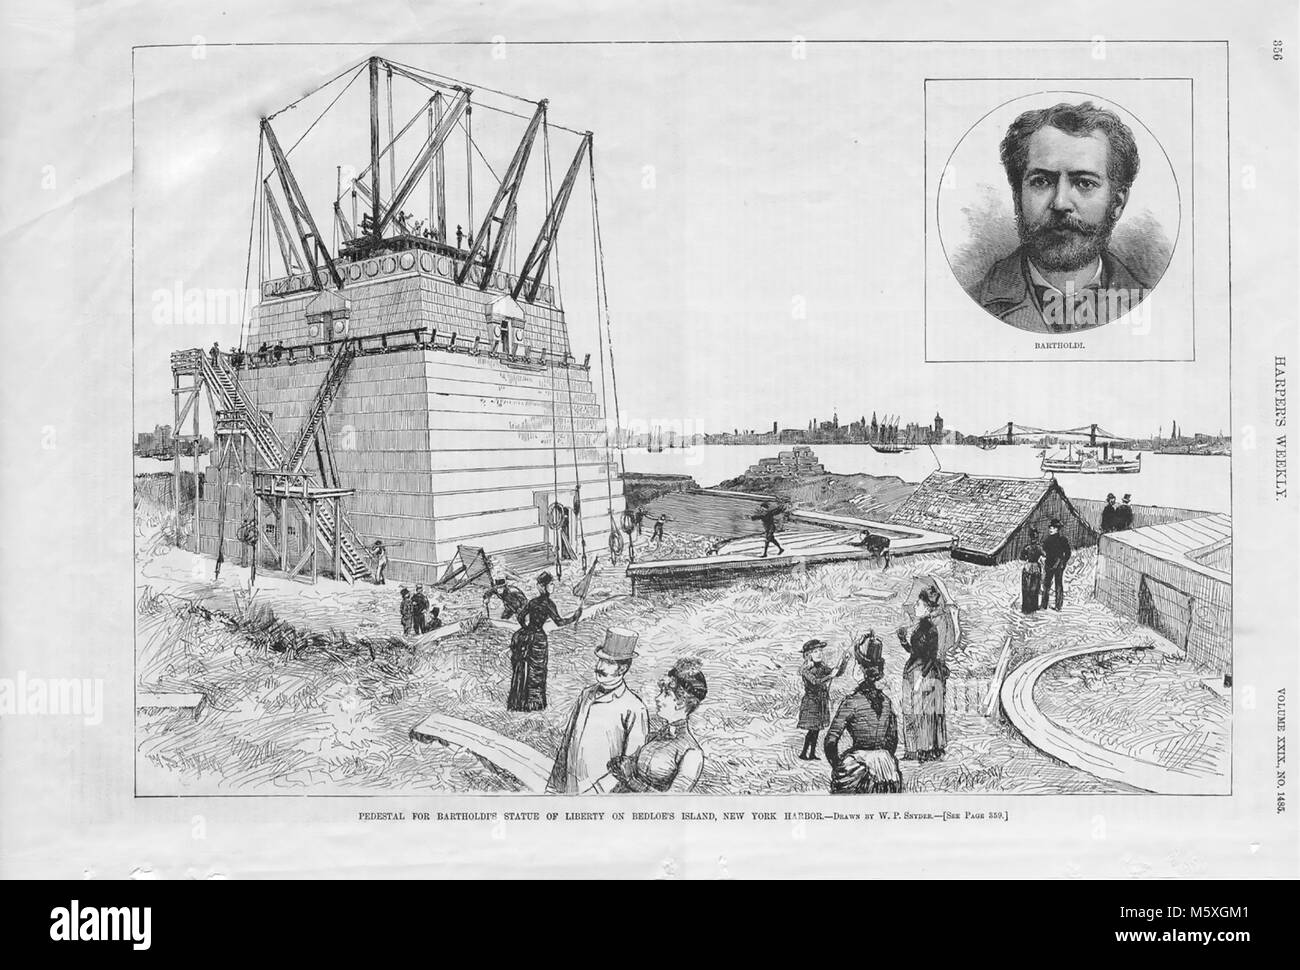 FREDERIC AUGUSTE BARTHOLDI (1834-1904) French sculptor who designed the Statue of Liberty.  The Statue under construction on Liberty Island, New York with Bartholdi inset, from Harper's Weekly. Stock Photo